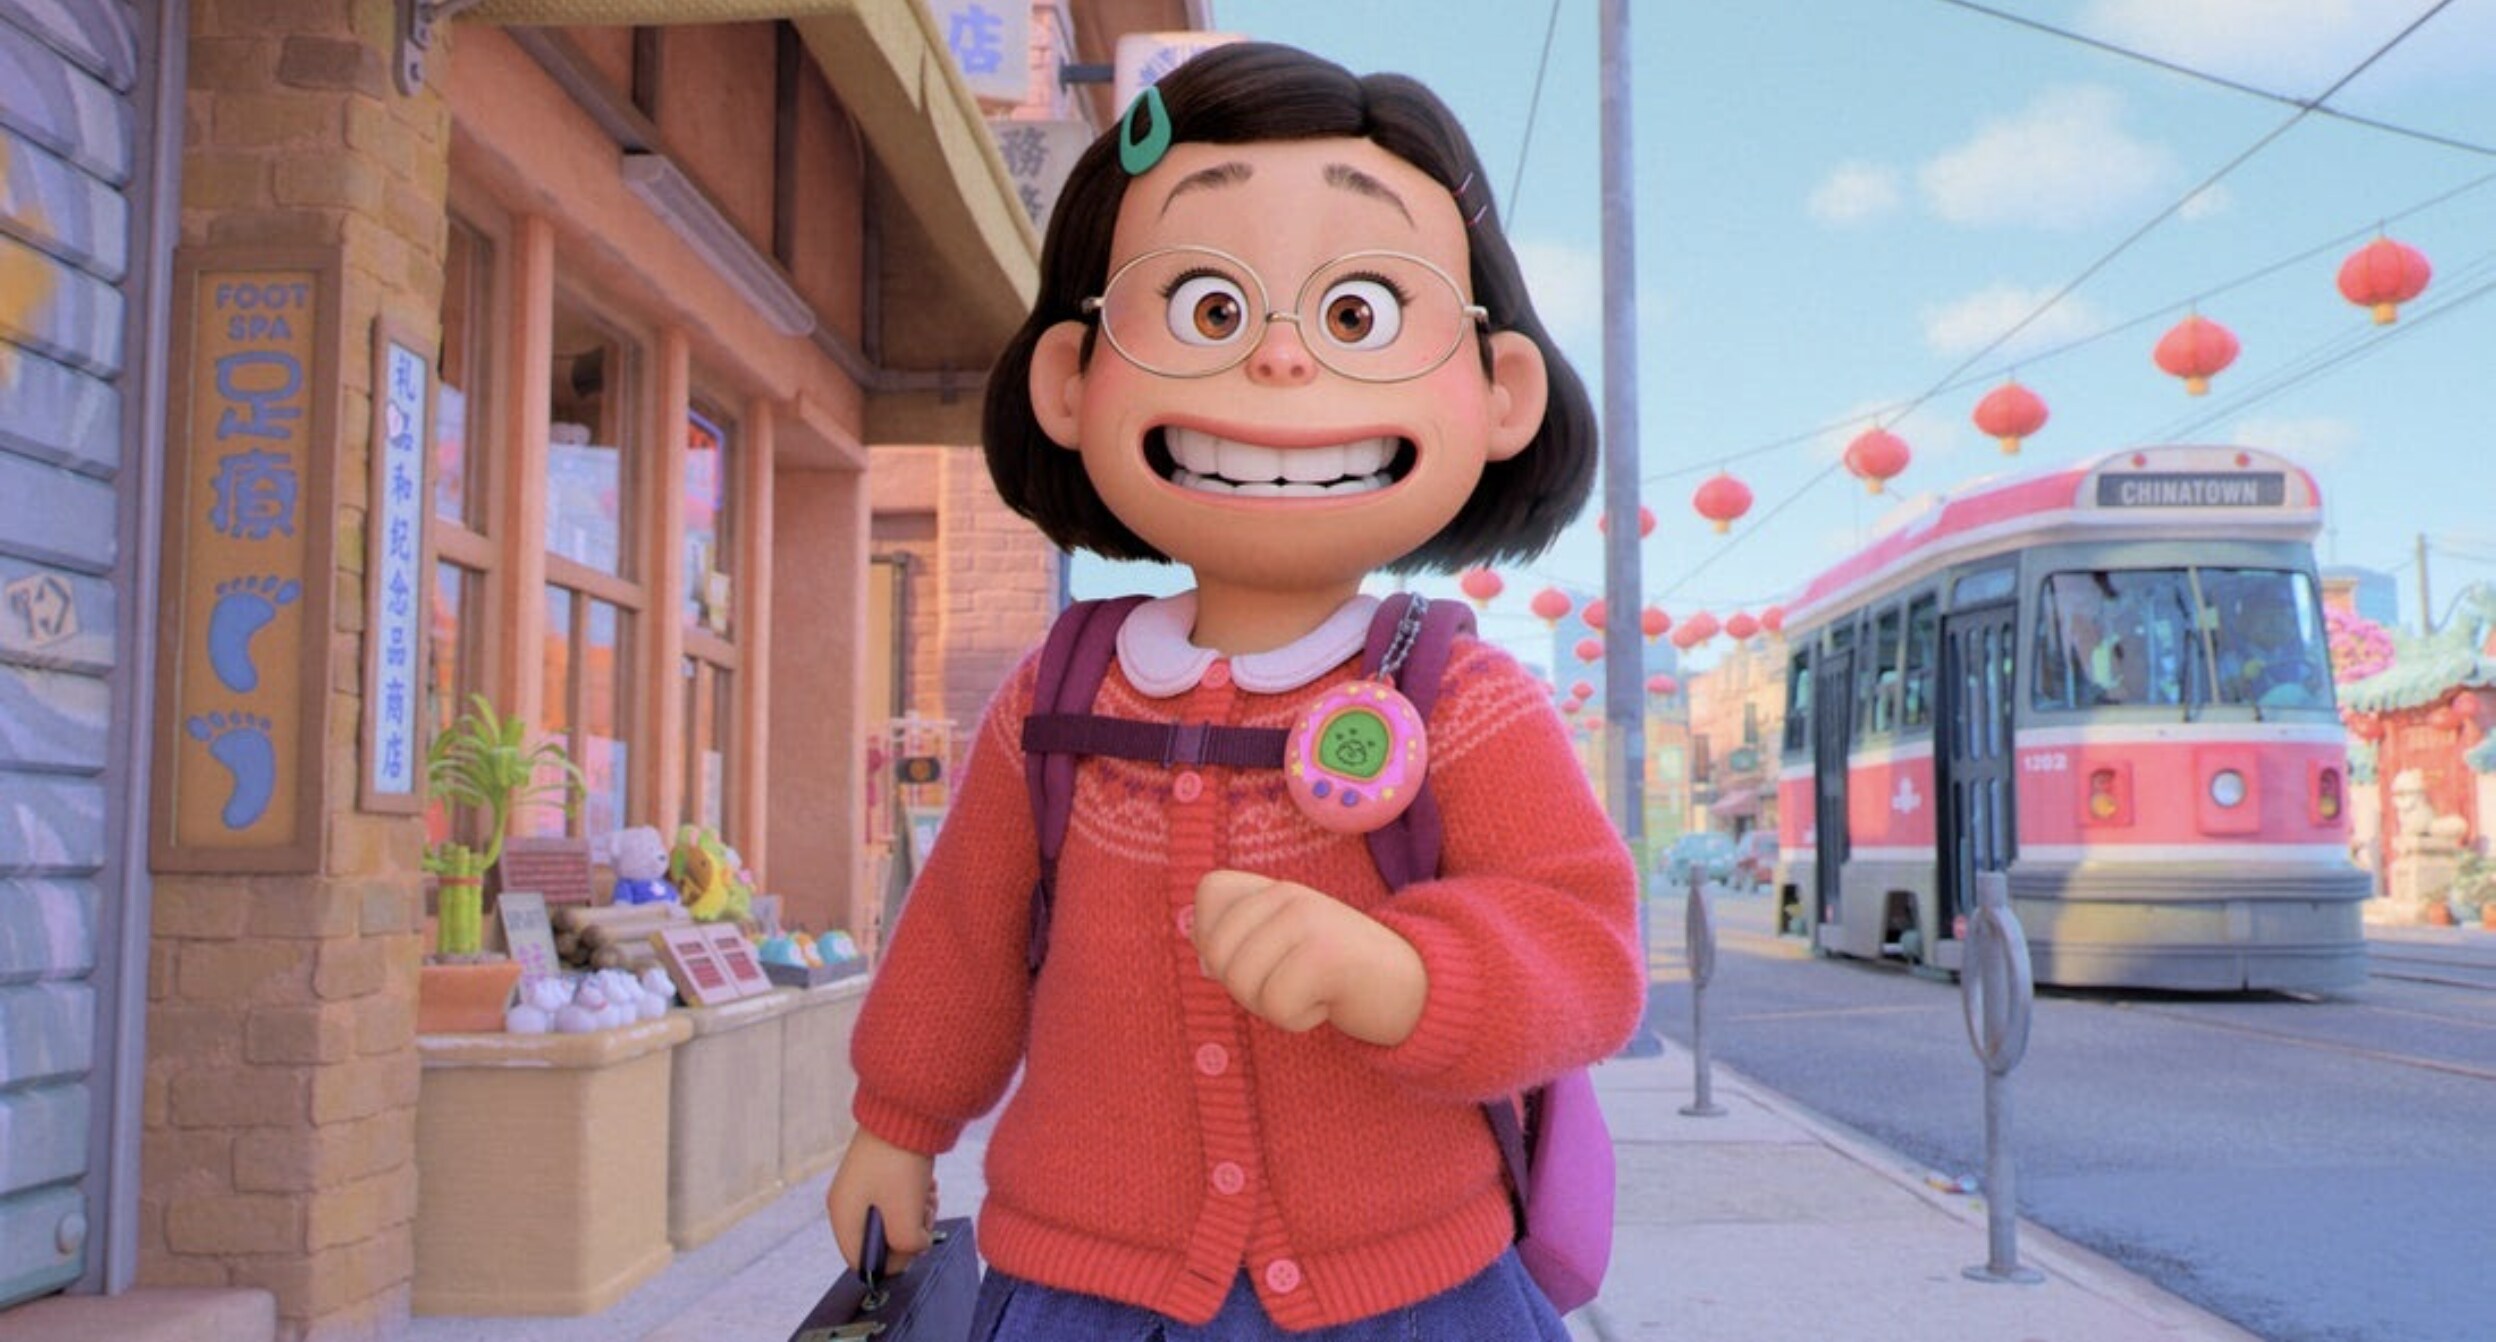 Mei walks with a big smile on her face in Disney and Pixar's Turning Red